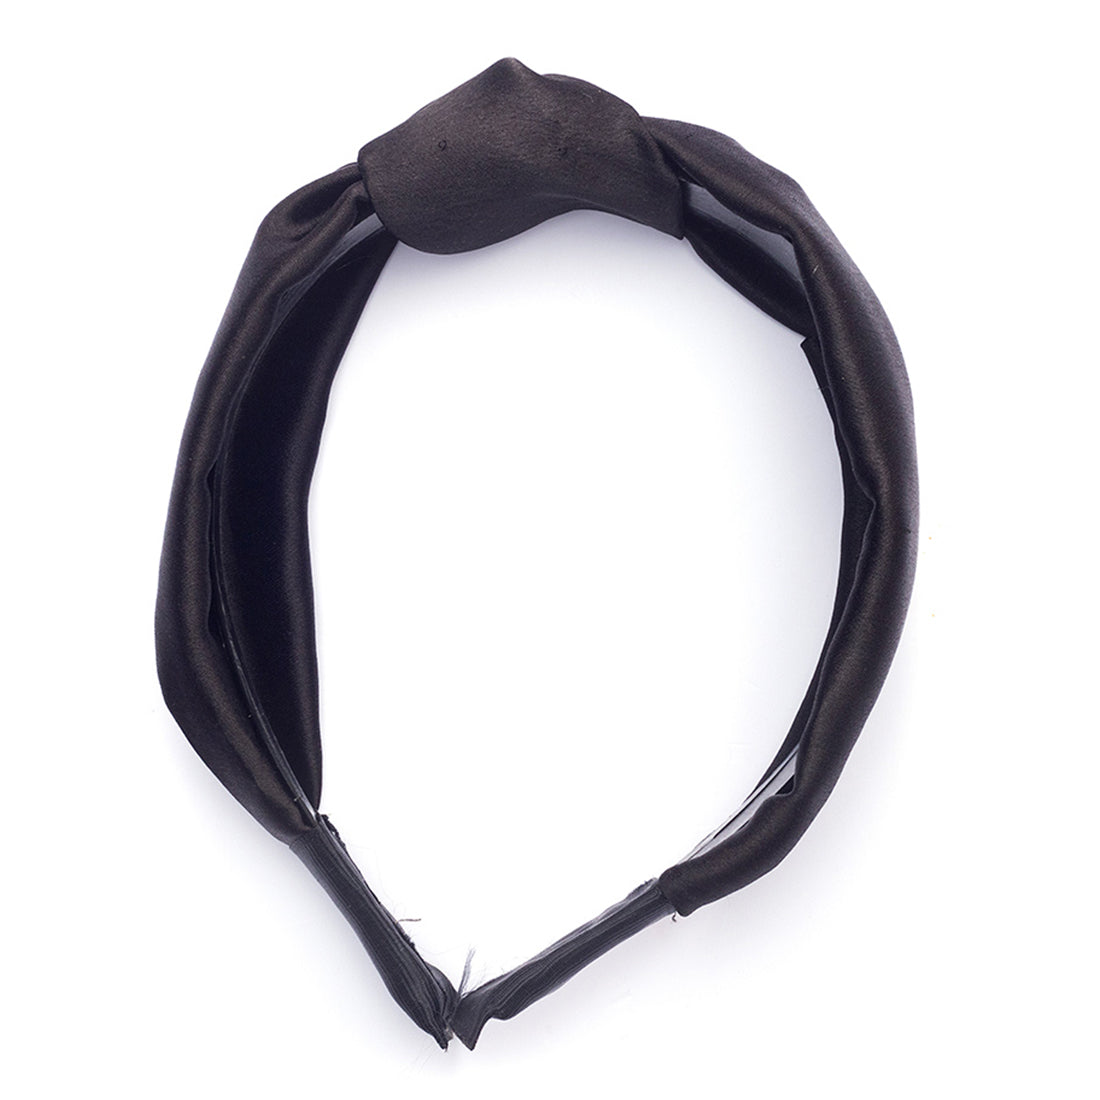 Set Of 2 Chic Grey And Black Satin Hairband With Elegant Top Knot